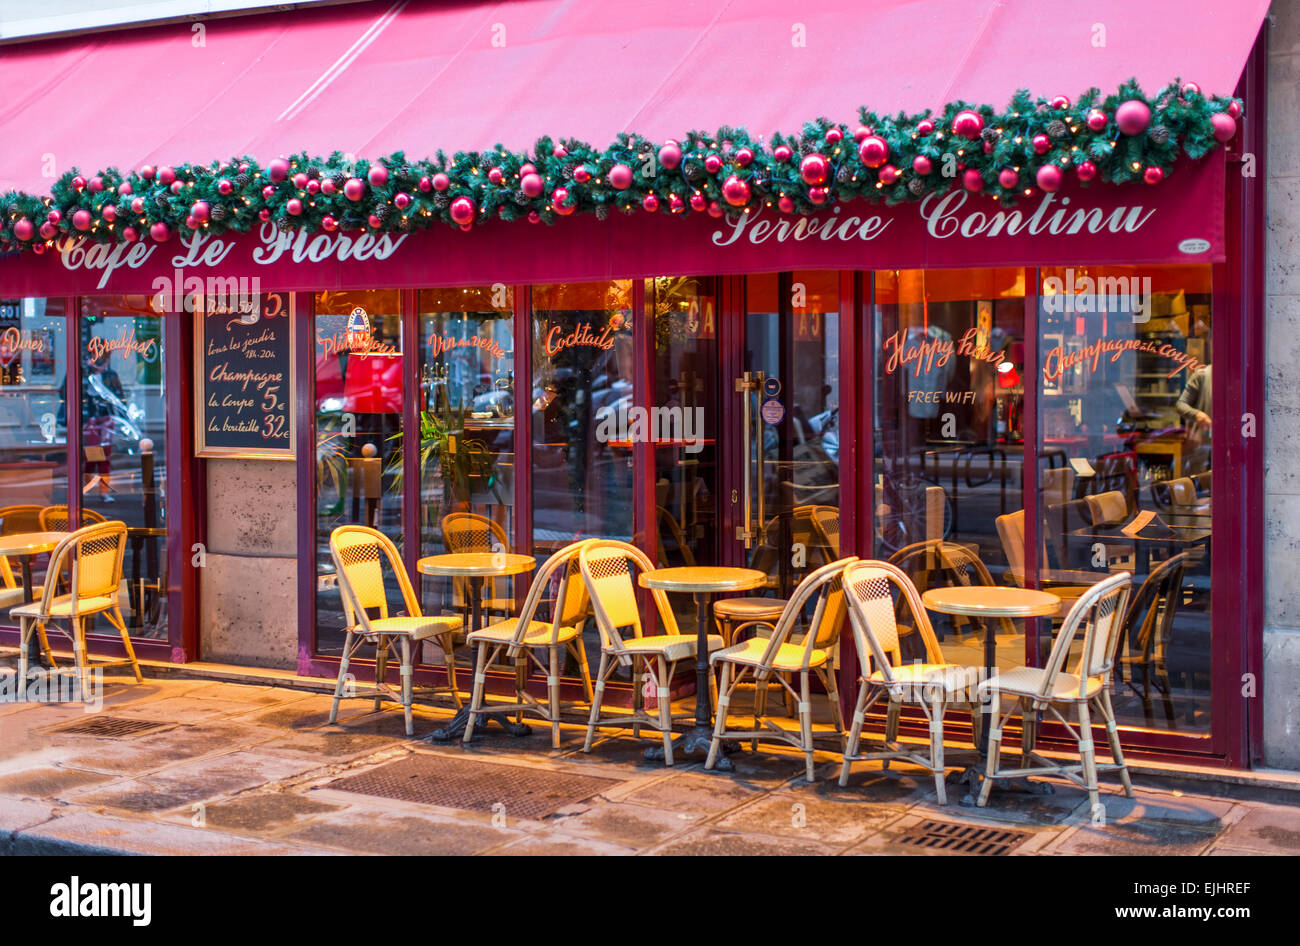 Outdoor cafe restaurant Cafe le Flores in Paris, France Stock Photo